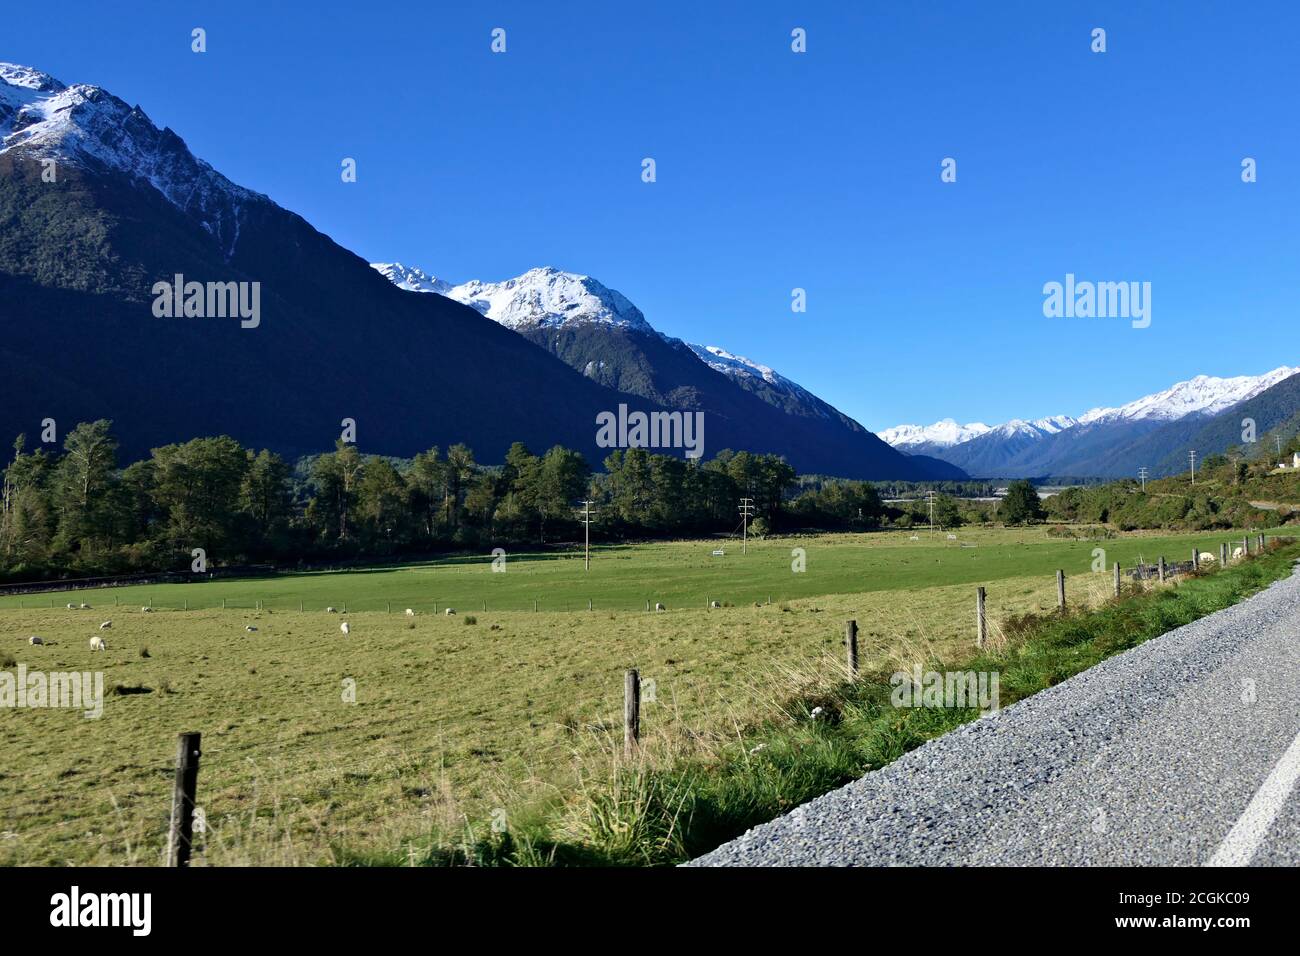 Mountain road in the Southern Alps in New Zealand on a winter day with a clear blue sky and snowy peaks Stock Photo